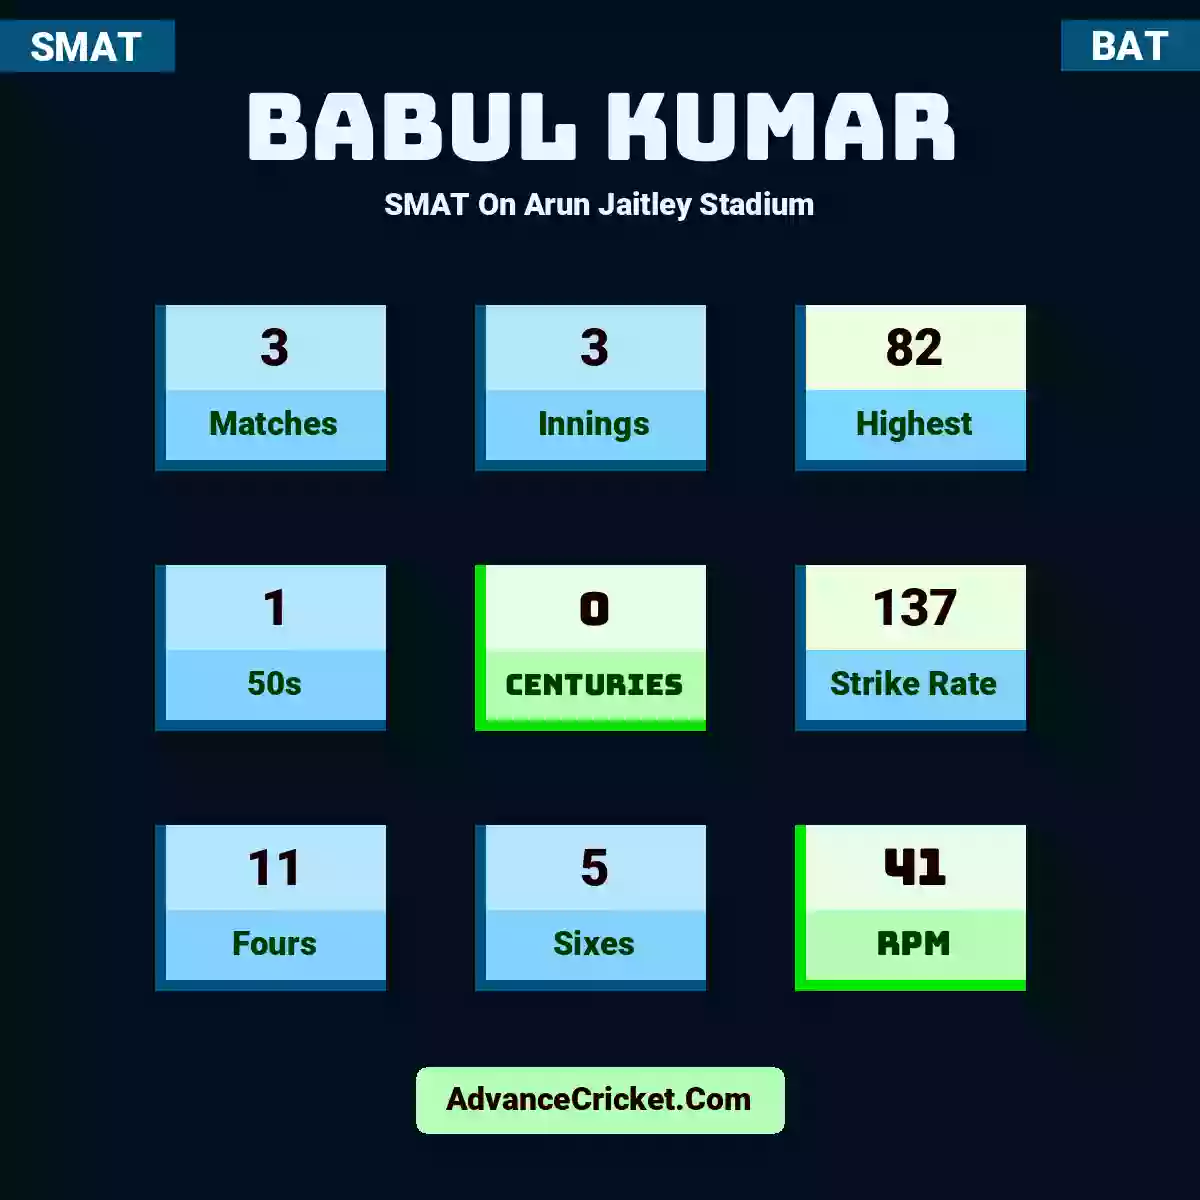 Babul Kumar SMAT  On Arun Jaitley Stadium, Babul Kumar played 3 matches, scored 82 runs as highest, 1 half-centuries, and 0 centuries, with a strike rate of 137. B.Kumar hit 11 fours and 5 sixes, with an RPM of 41.